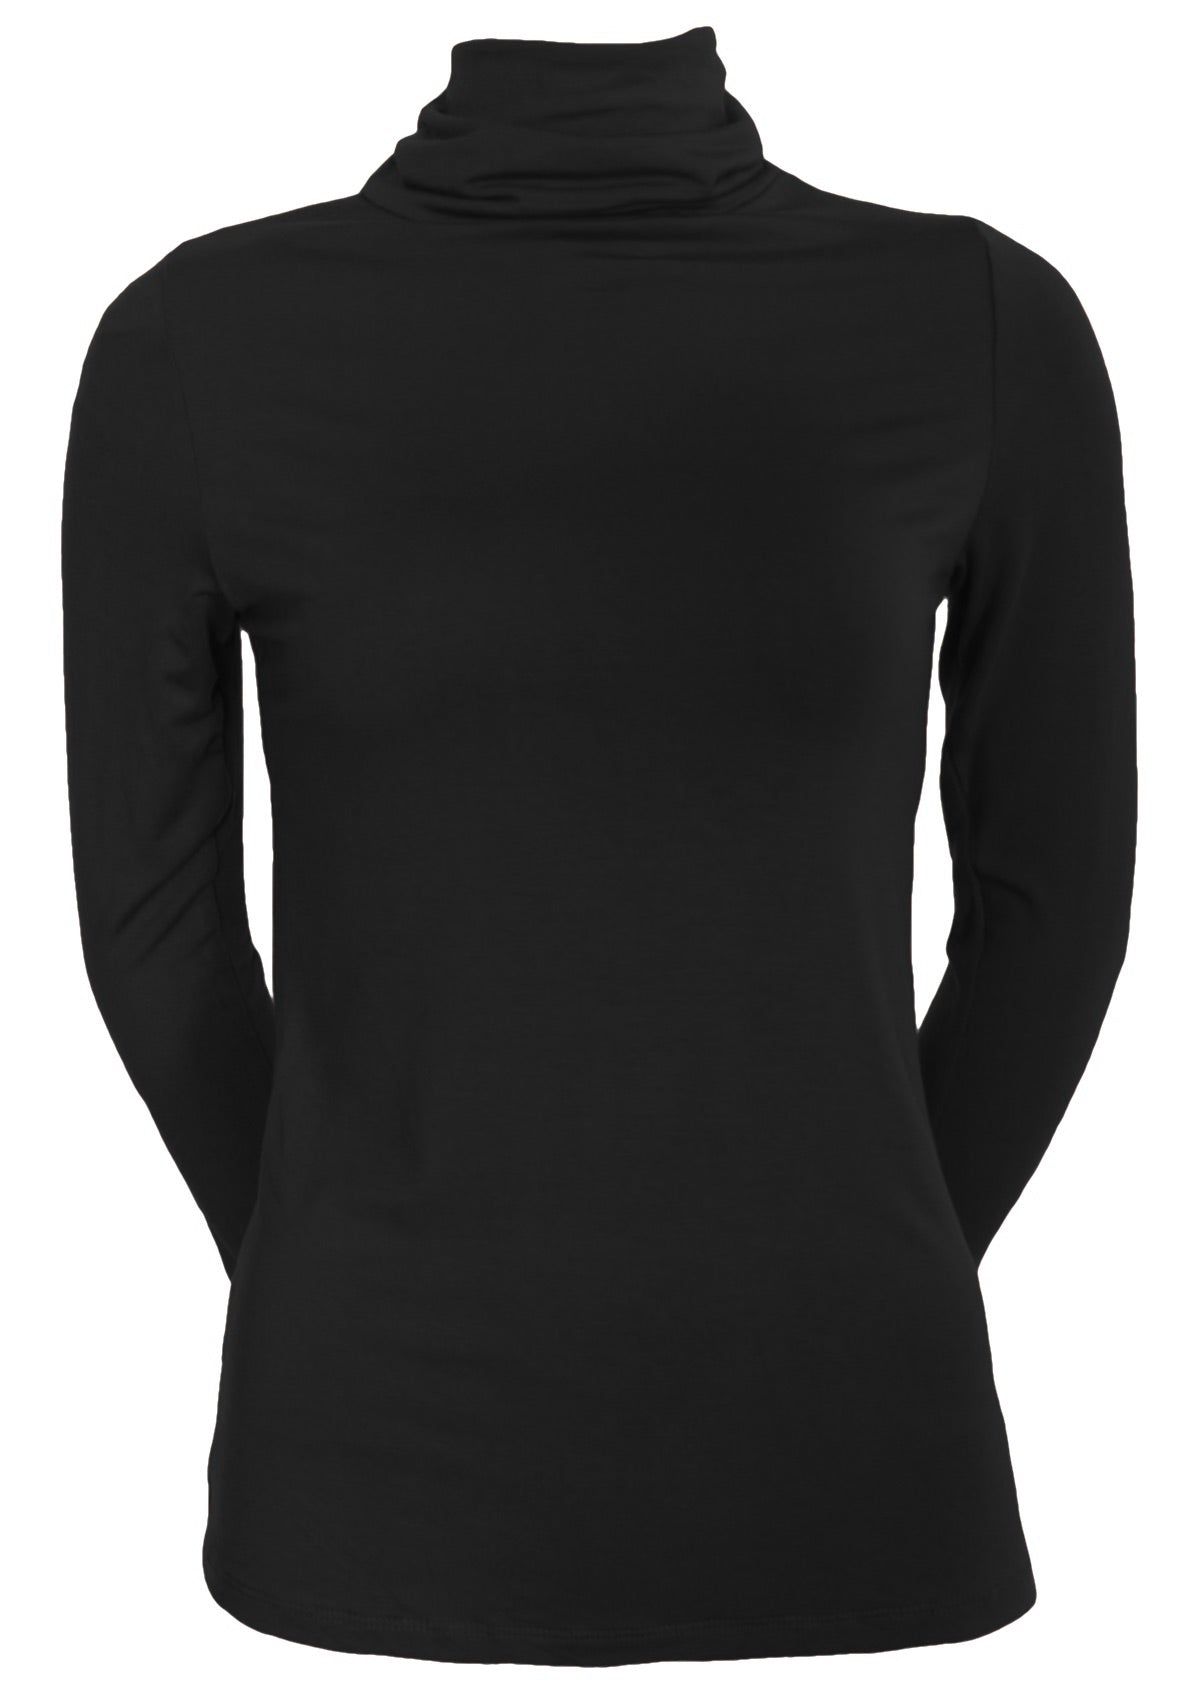 Front view of a women's turtle neck black fitted long sleeve soft stretch rayon top.